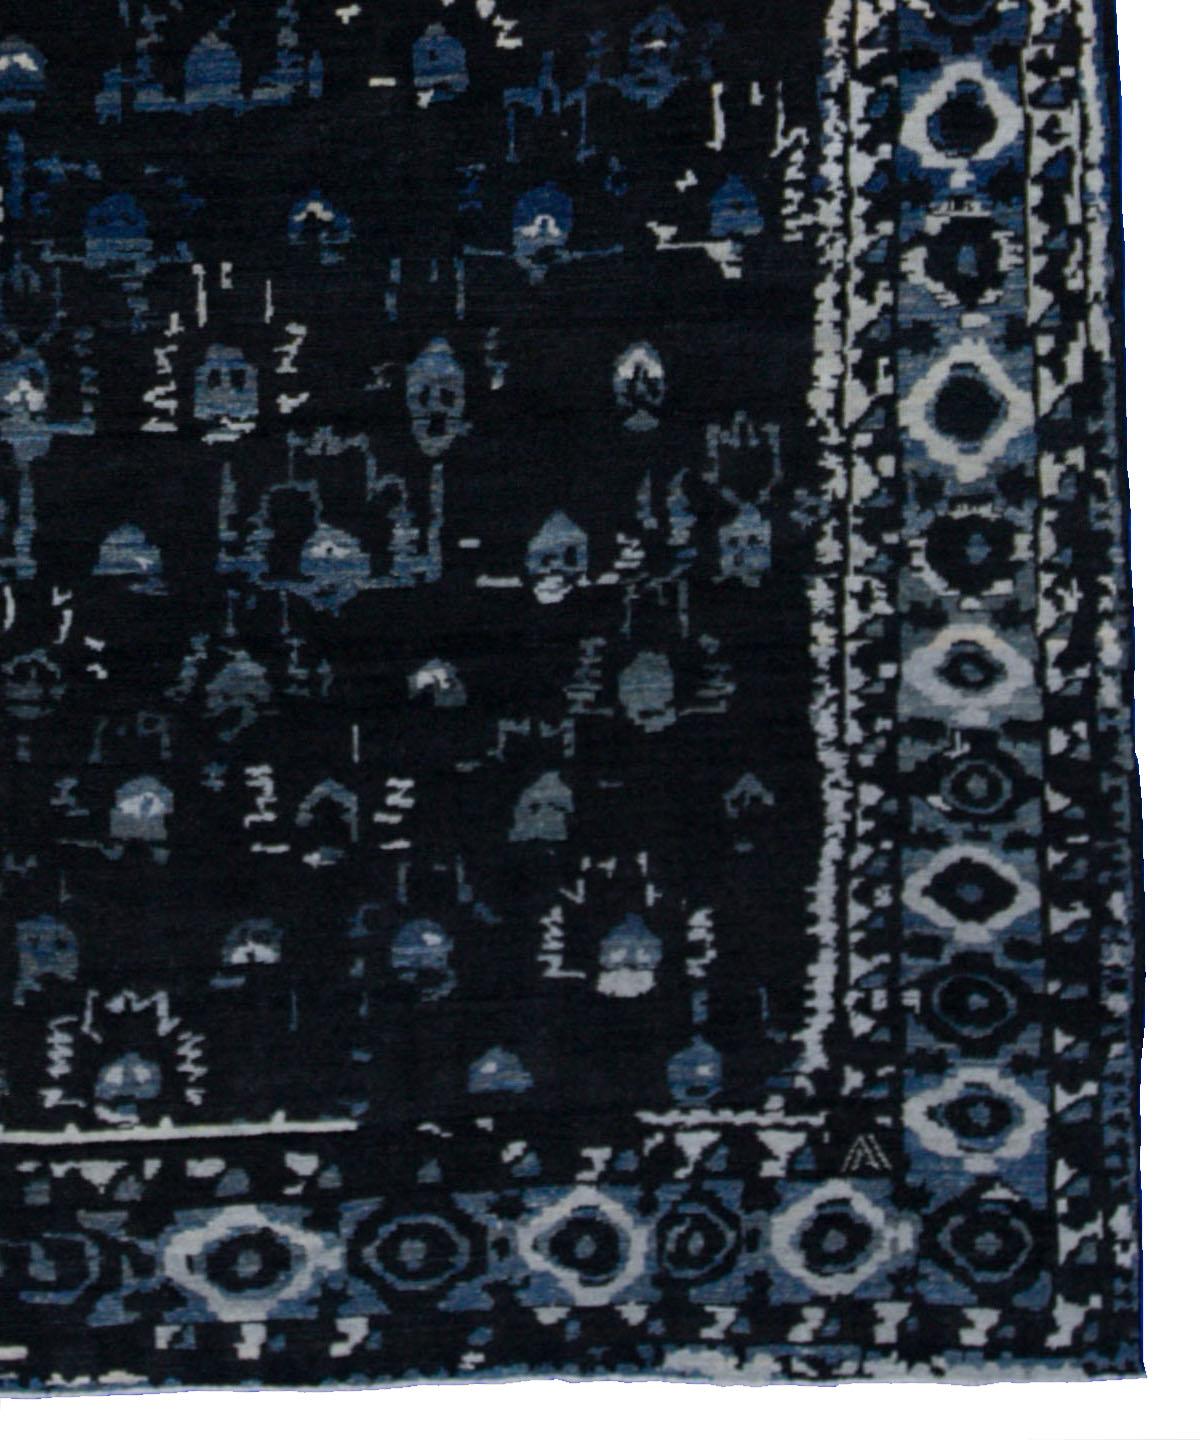 Contemporary Turkish rug made of handwoven sheep’s wool of the finest quality. It’s colored with organic vegetable dyes that are certified safe for humans and pets alike. It features an extraordinary blend of black and blue field with flower details